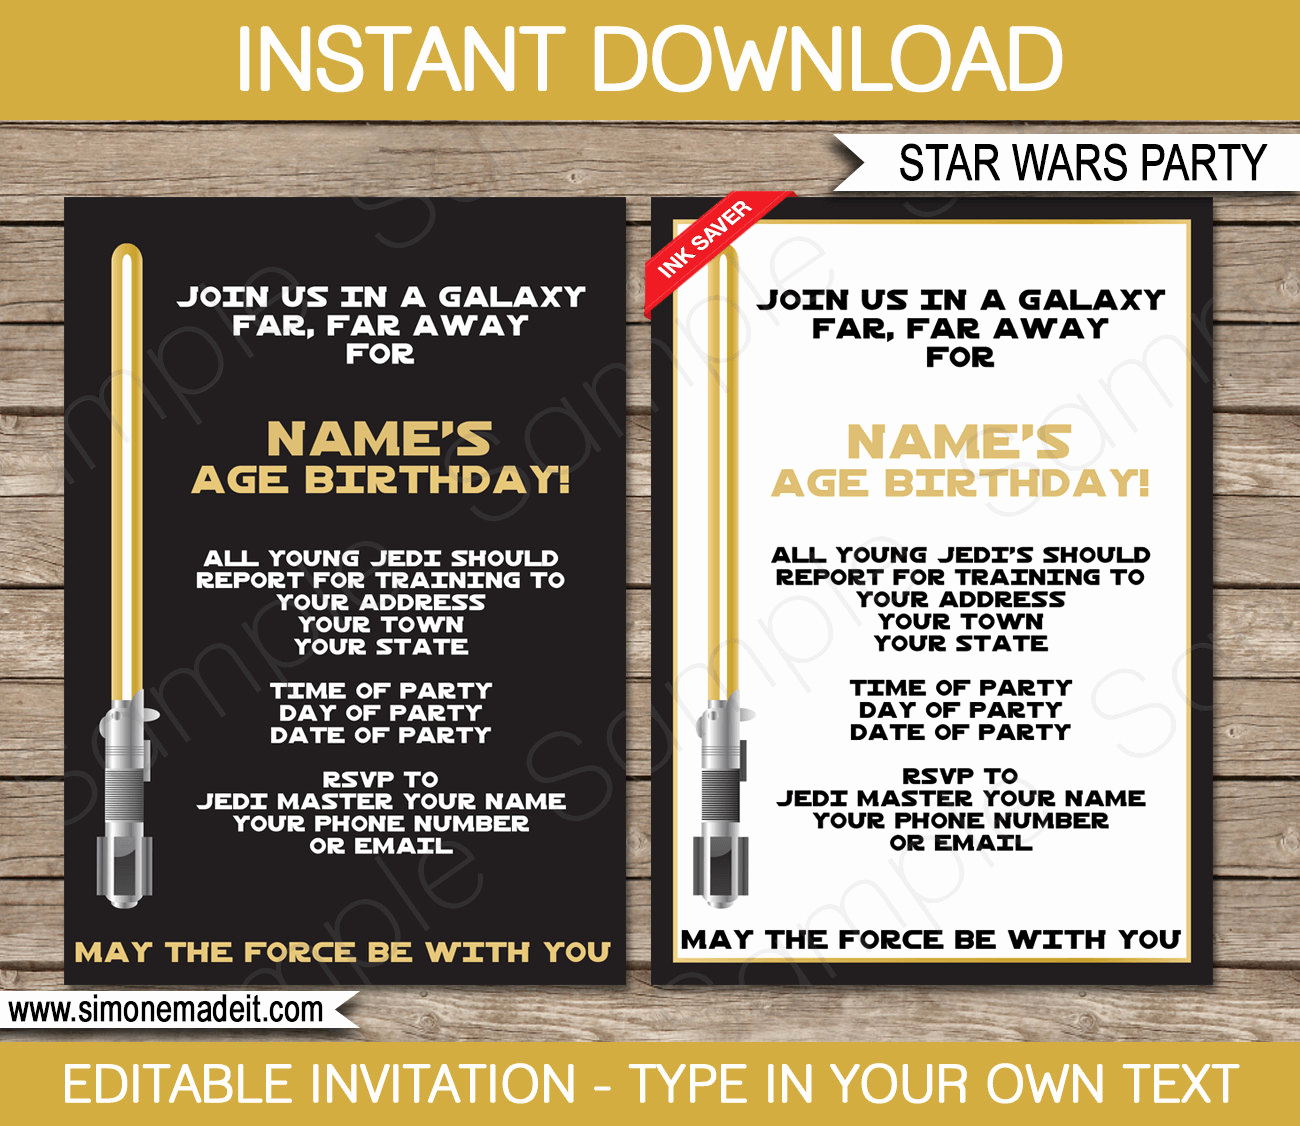 Star Wars Invitation Templates Awesome Star Wars Invitation Template Gold Birthday Party